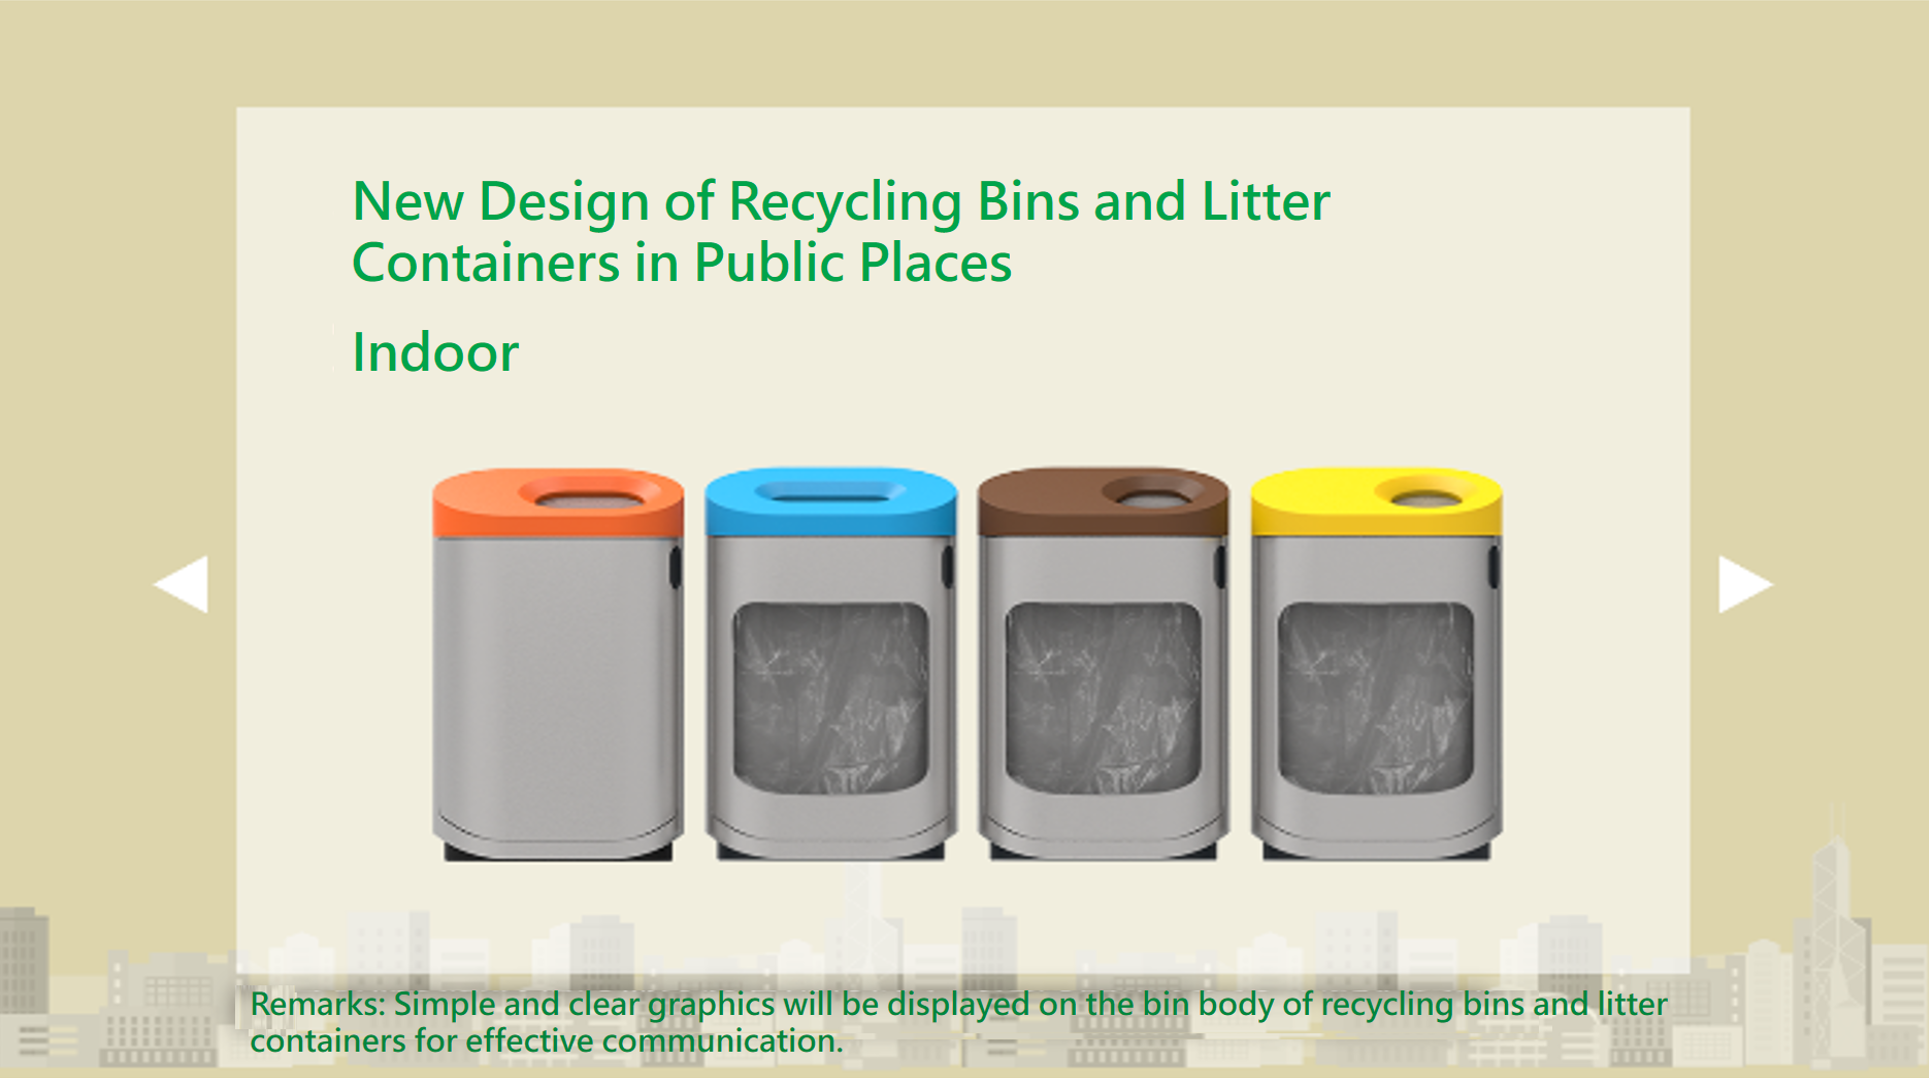 New Design of Recycling Bins and Litter Containers in Public Places - Indoors